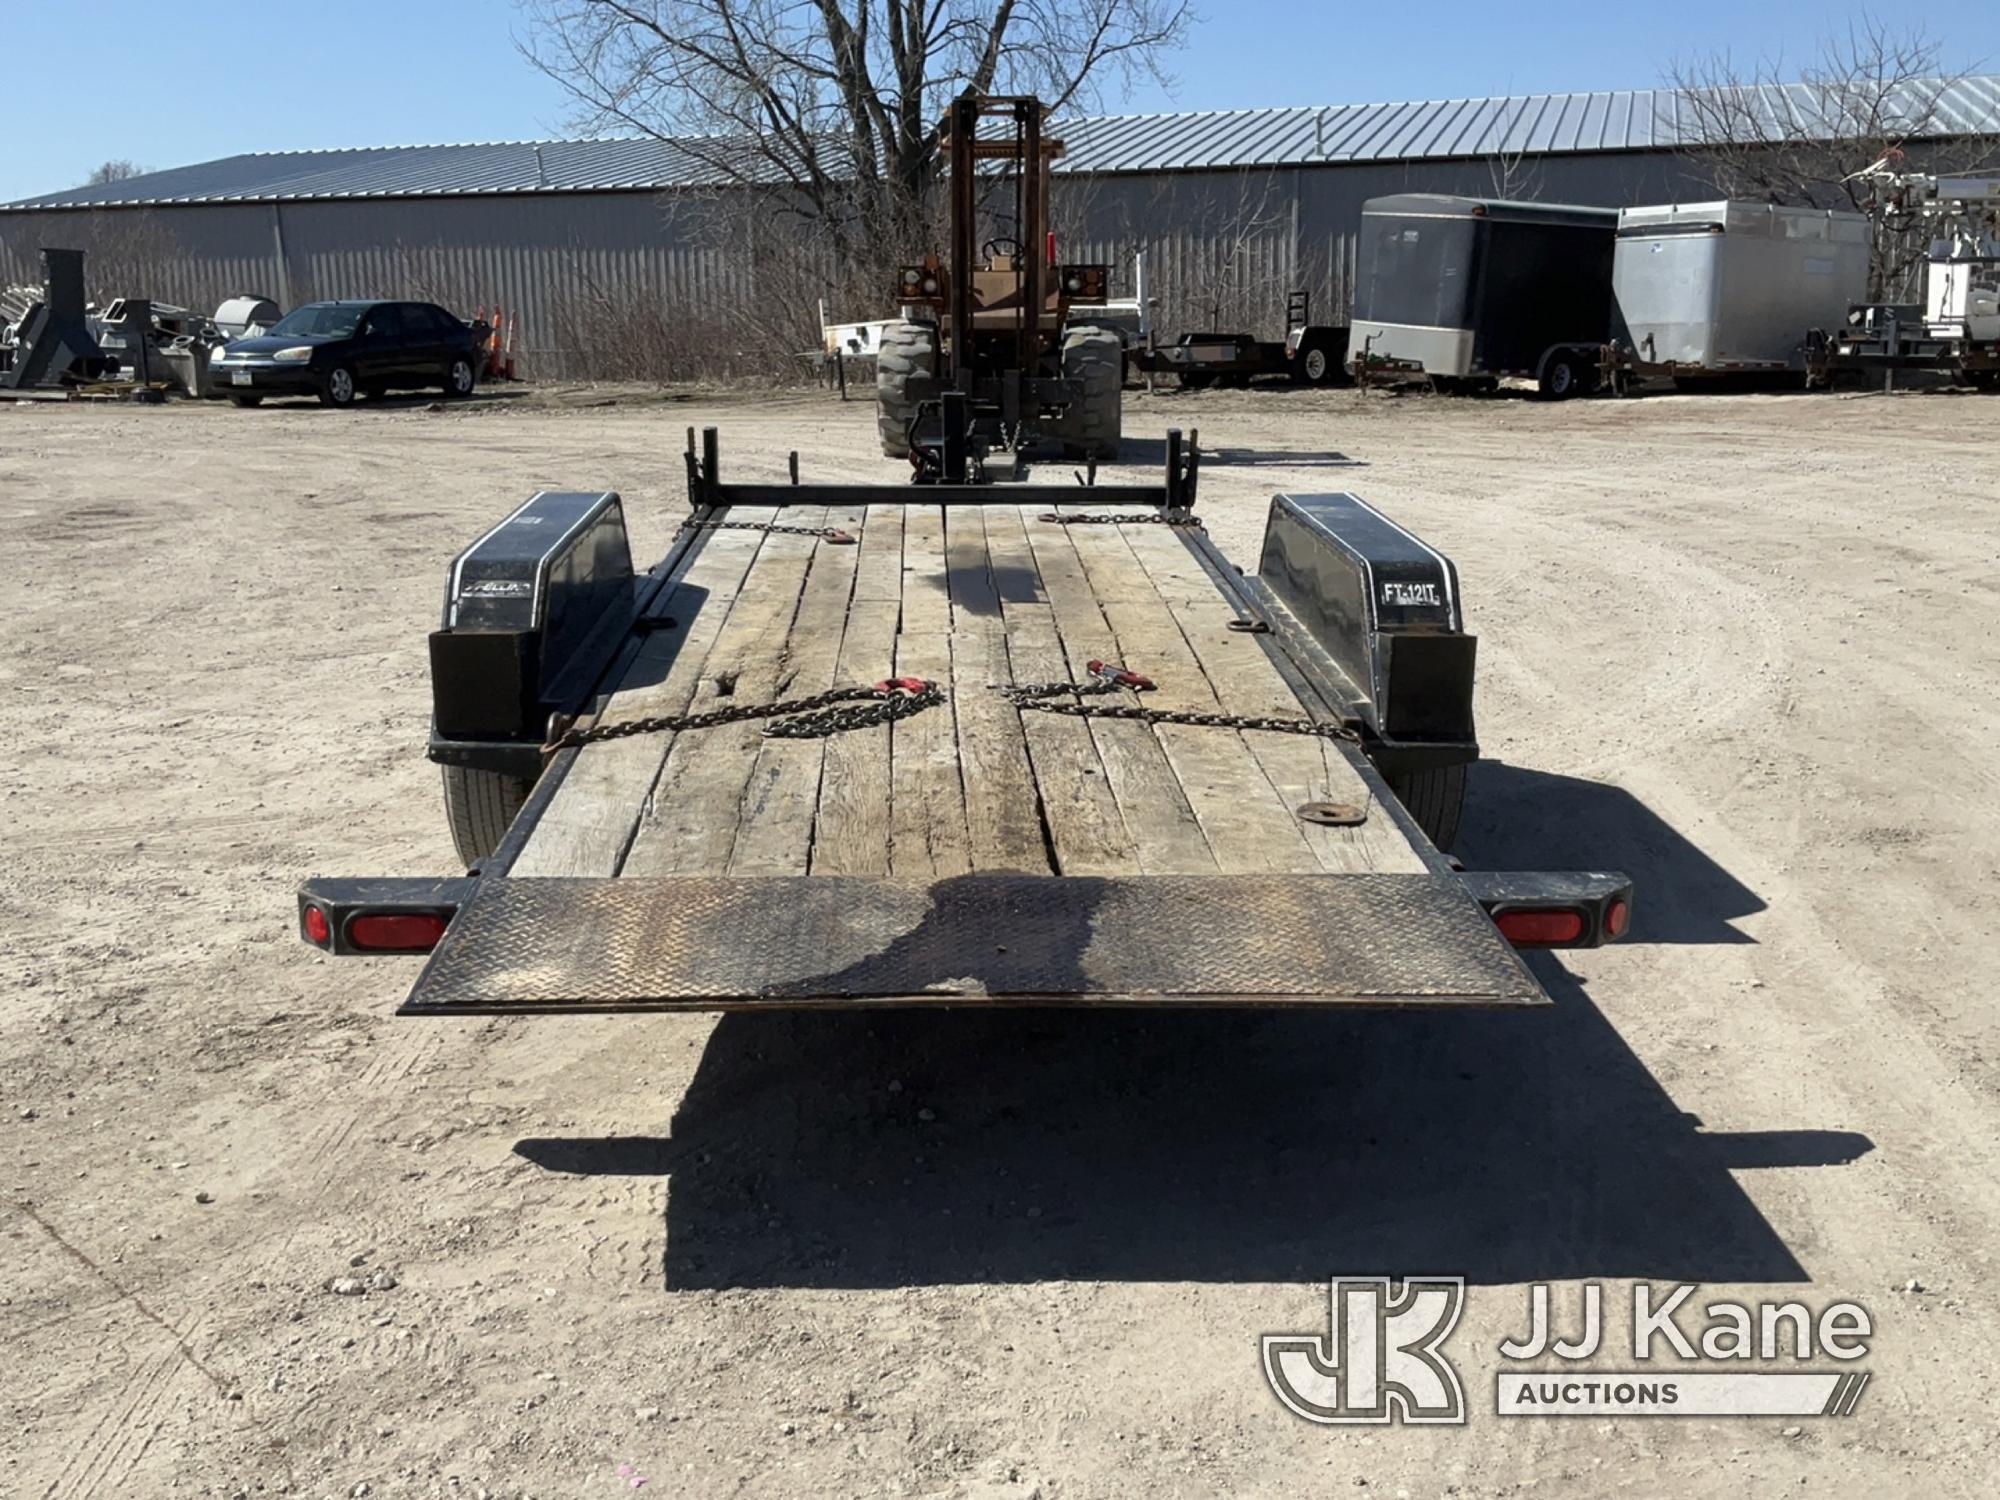 (Des Moines, IA) 2005 Felling FT-12 T/A Tagalong Equipment Trailer, Trailer 24ft x 8ft 5in Deck 15ft